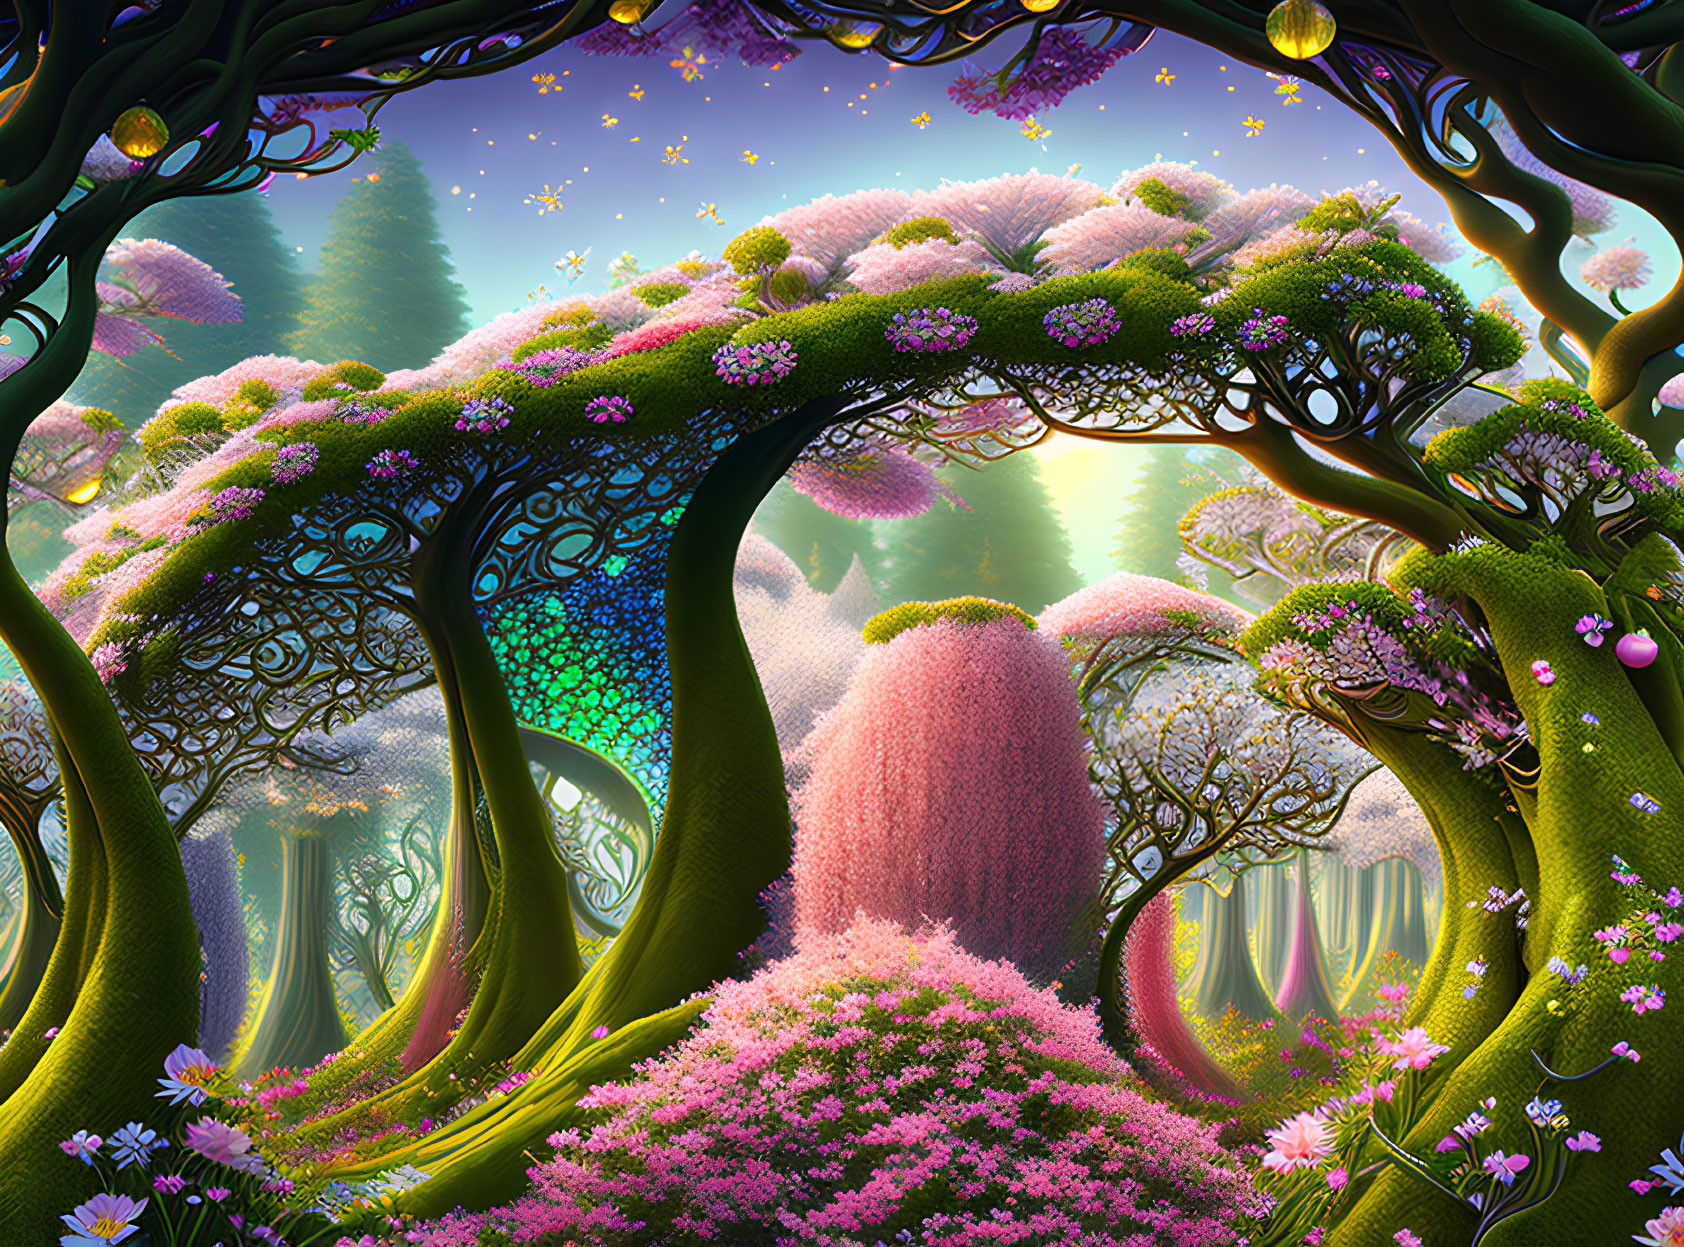 Fantasy Forest in Bloom